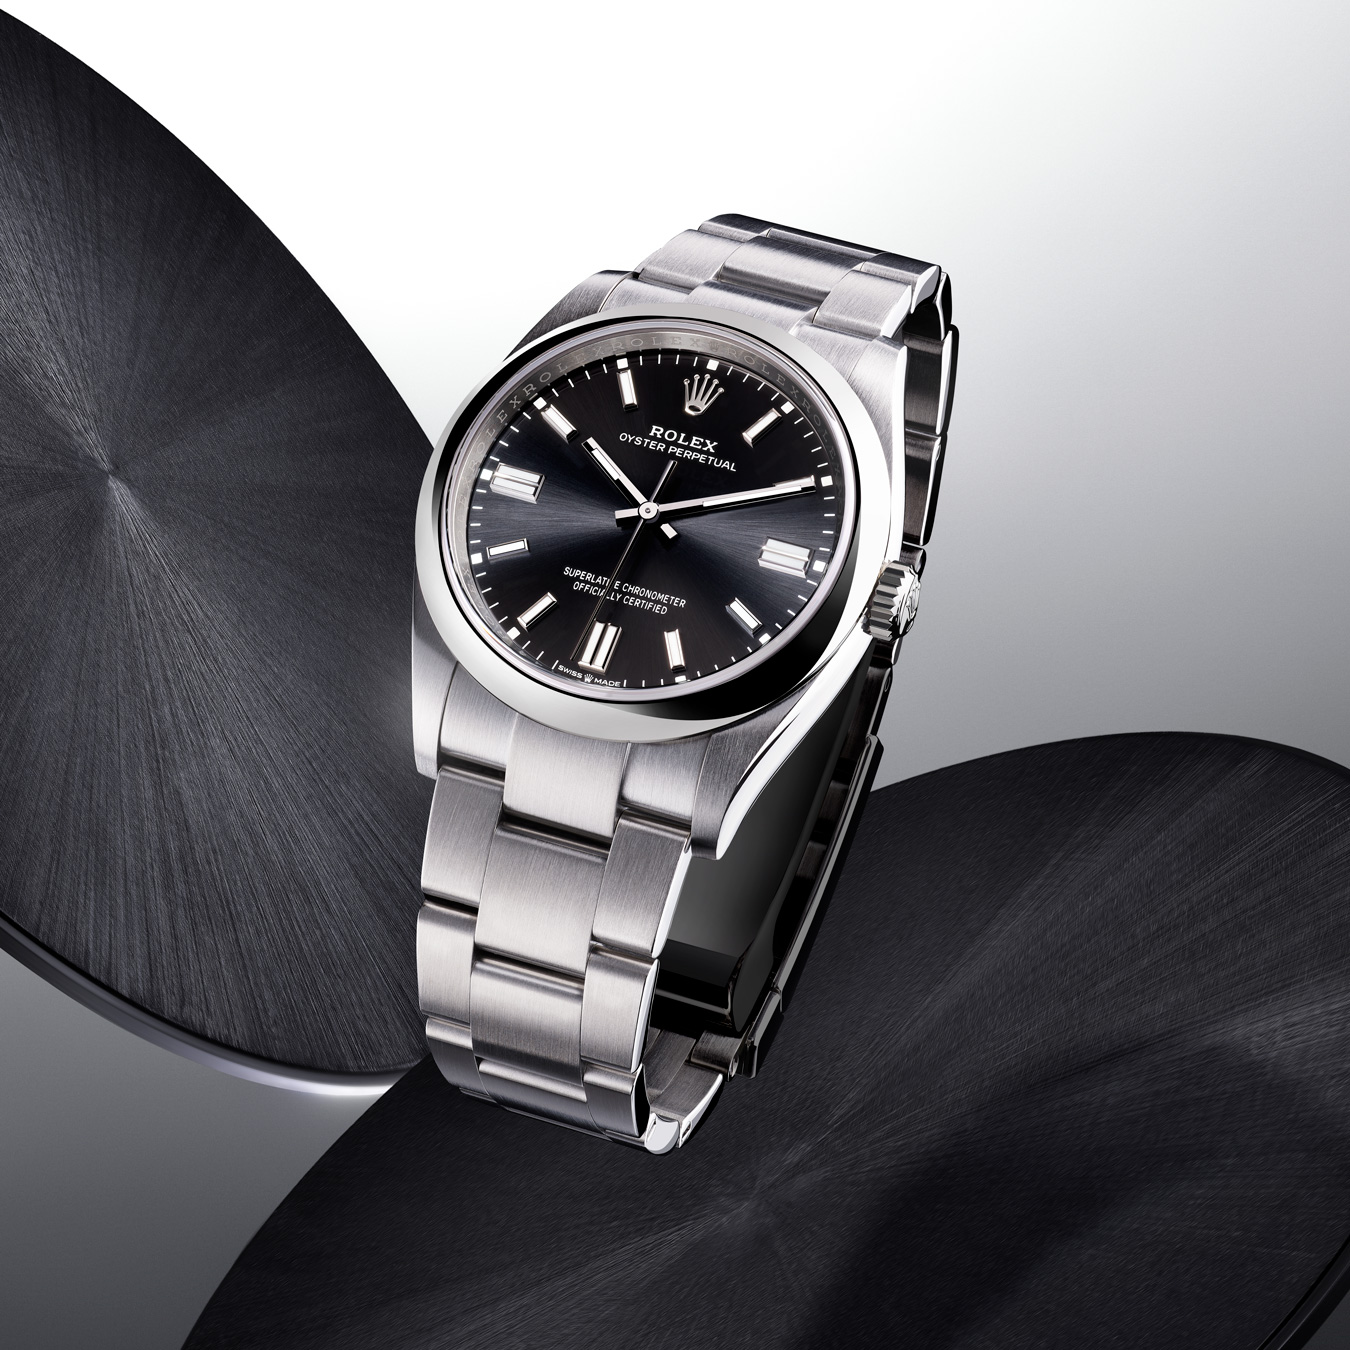 Oyster Perpetual The essence of the oyster checkerboard image desktop x